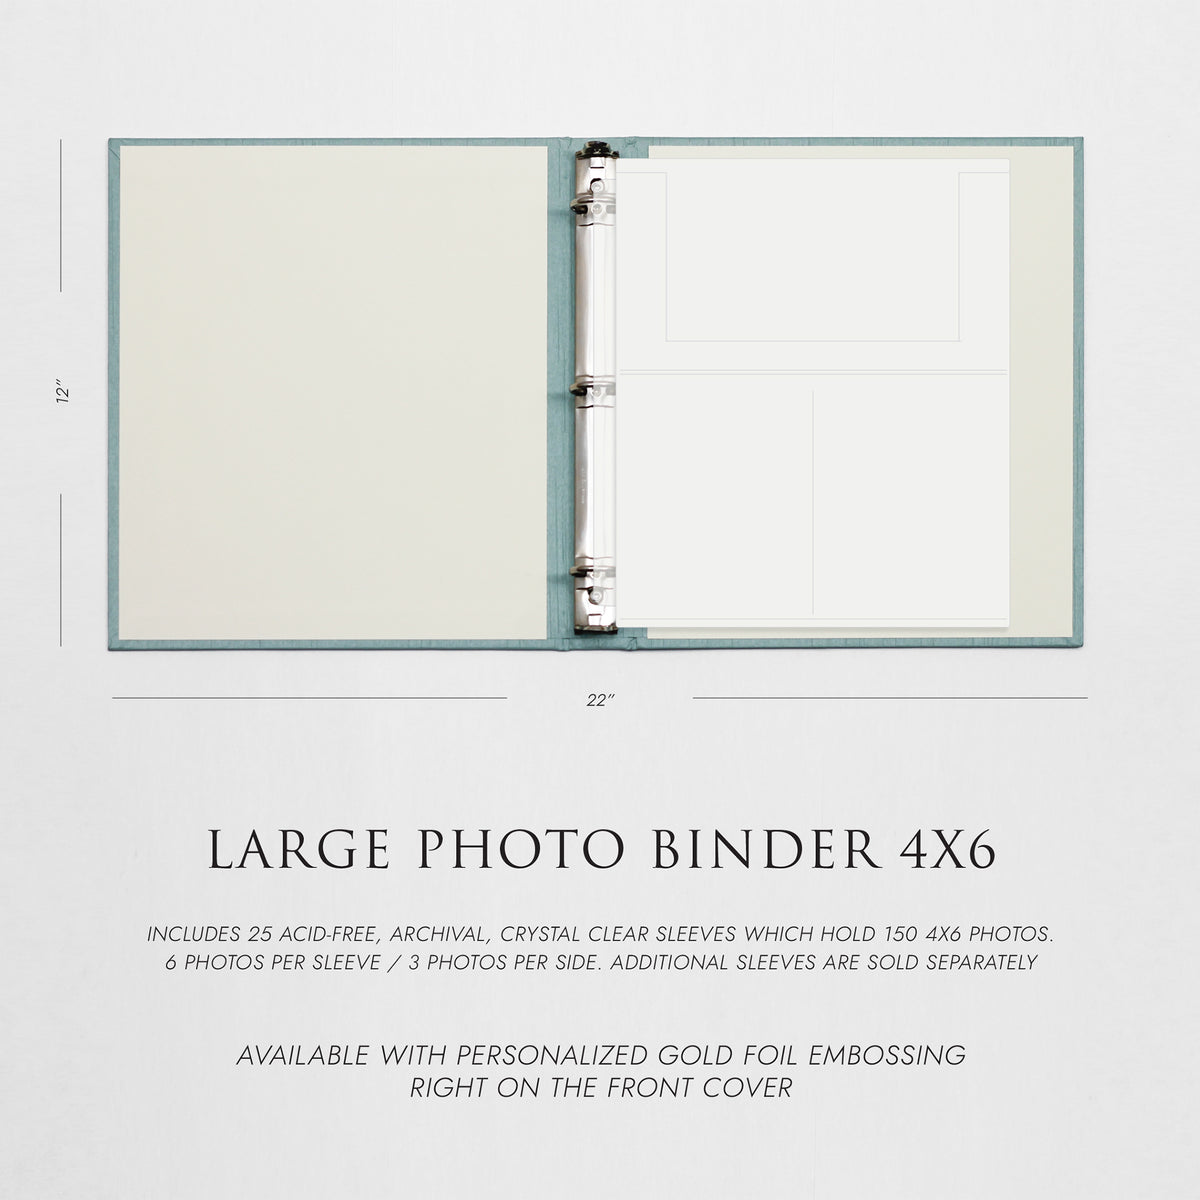 Large Photo Binder (for 4x6 photos) with Amethyst Silk Cover